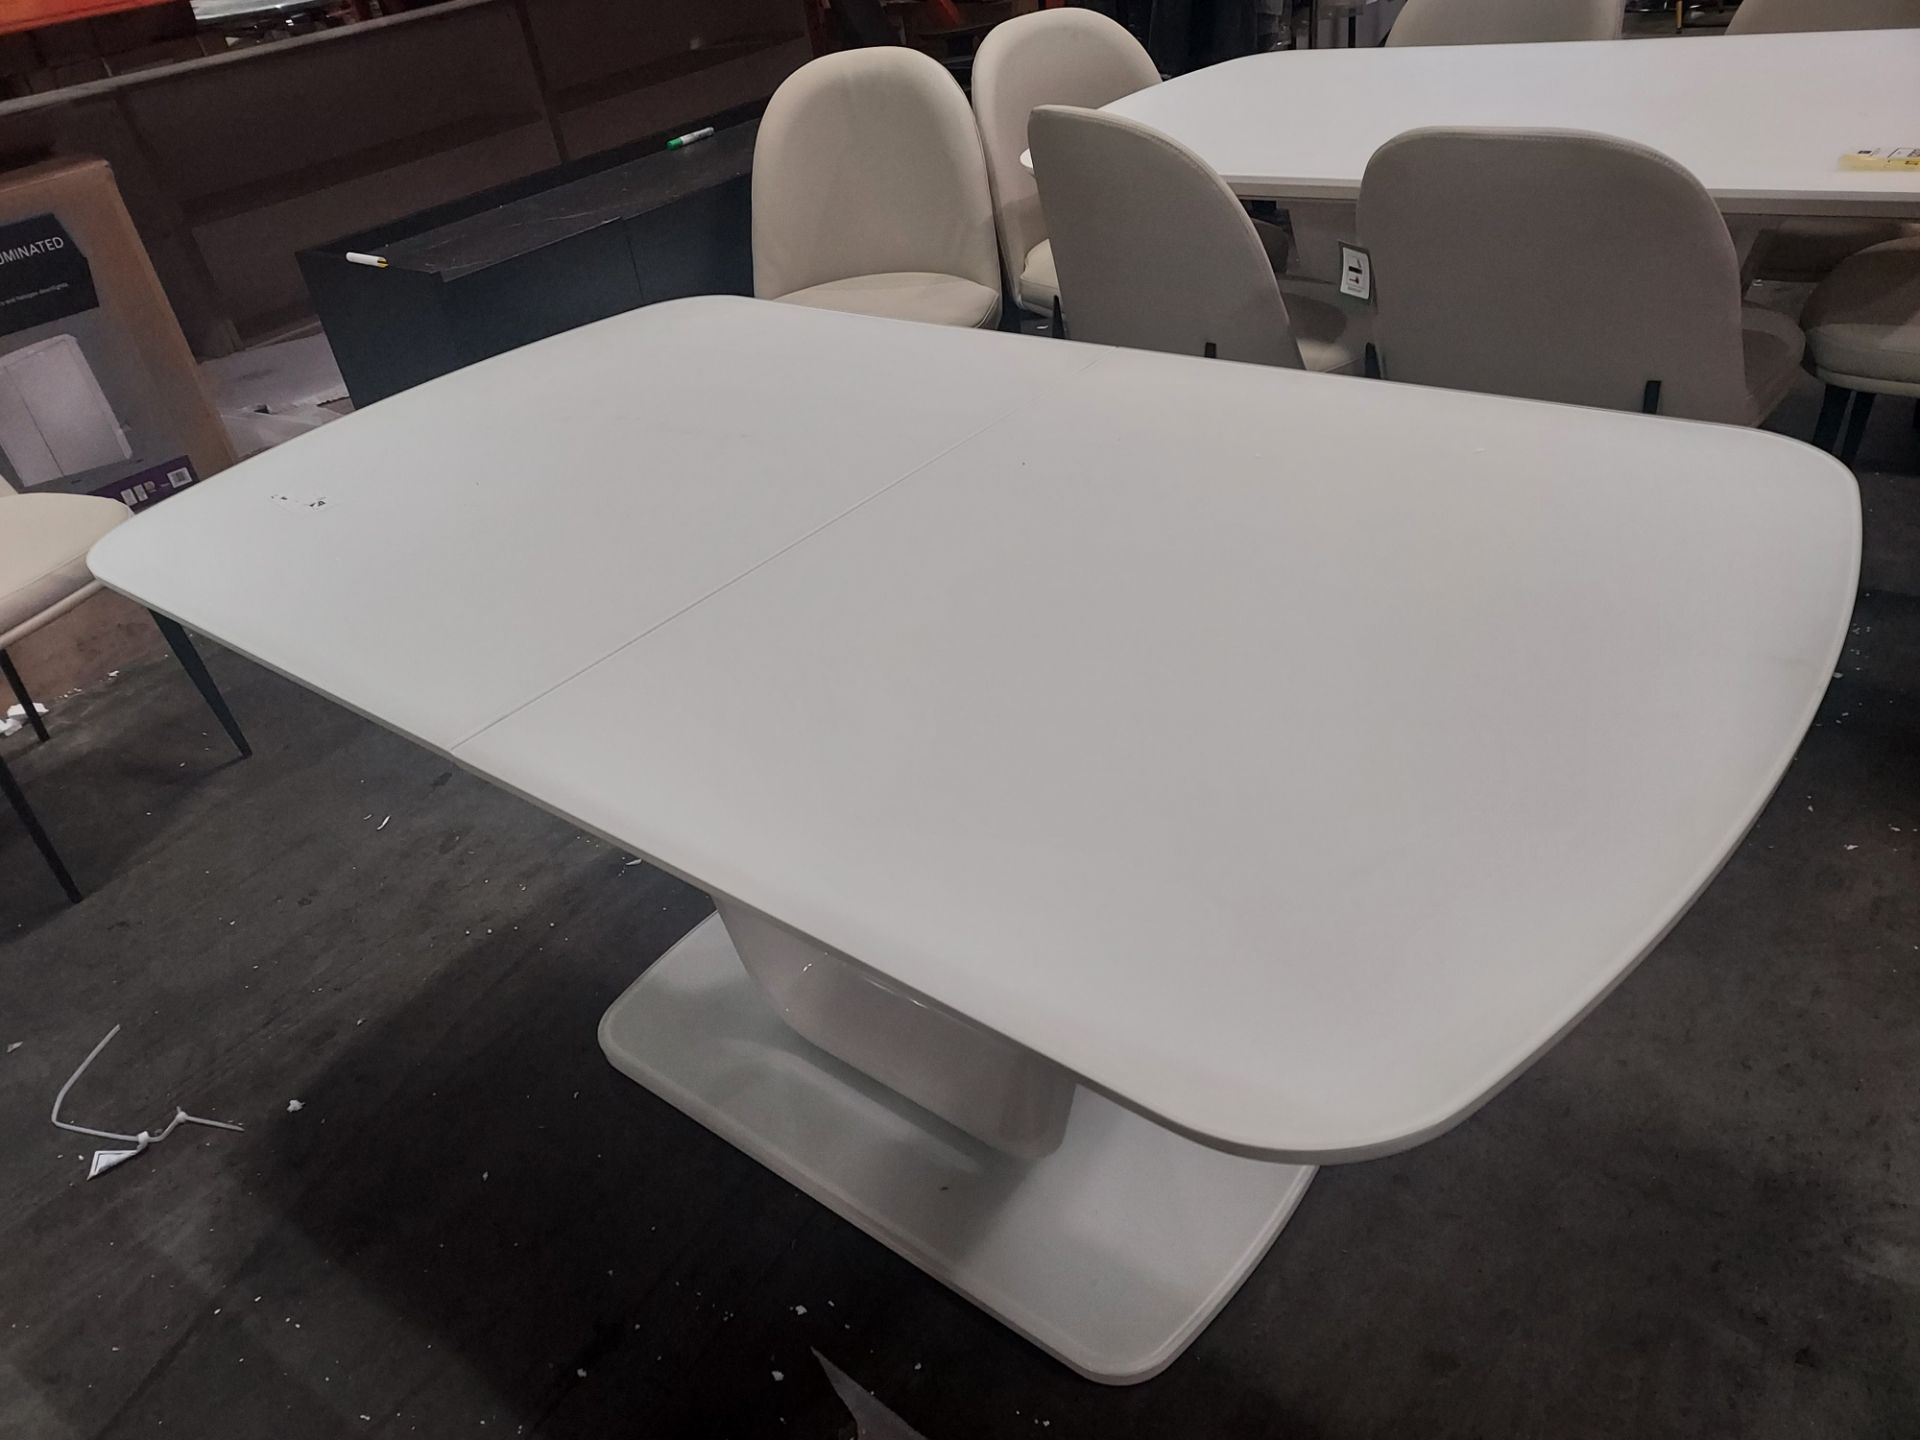 1 X LAZZARO DINING TABLE IN WHITE EXTENDING 1600/2000 X 900mm (PLEASE NOTE CUSTOMER RETURNS)